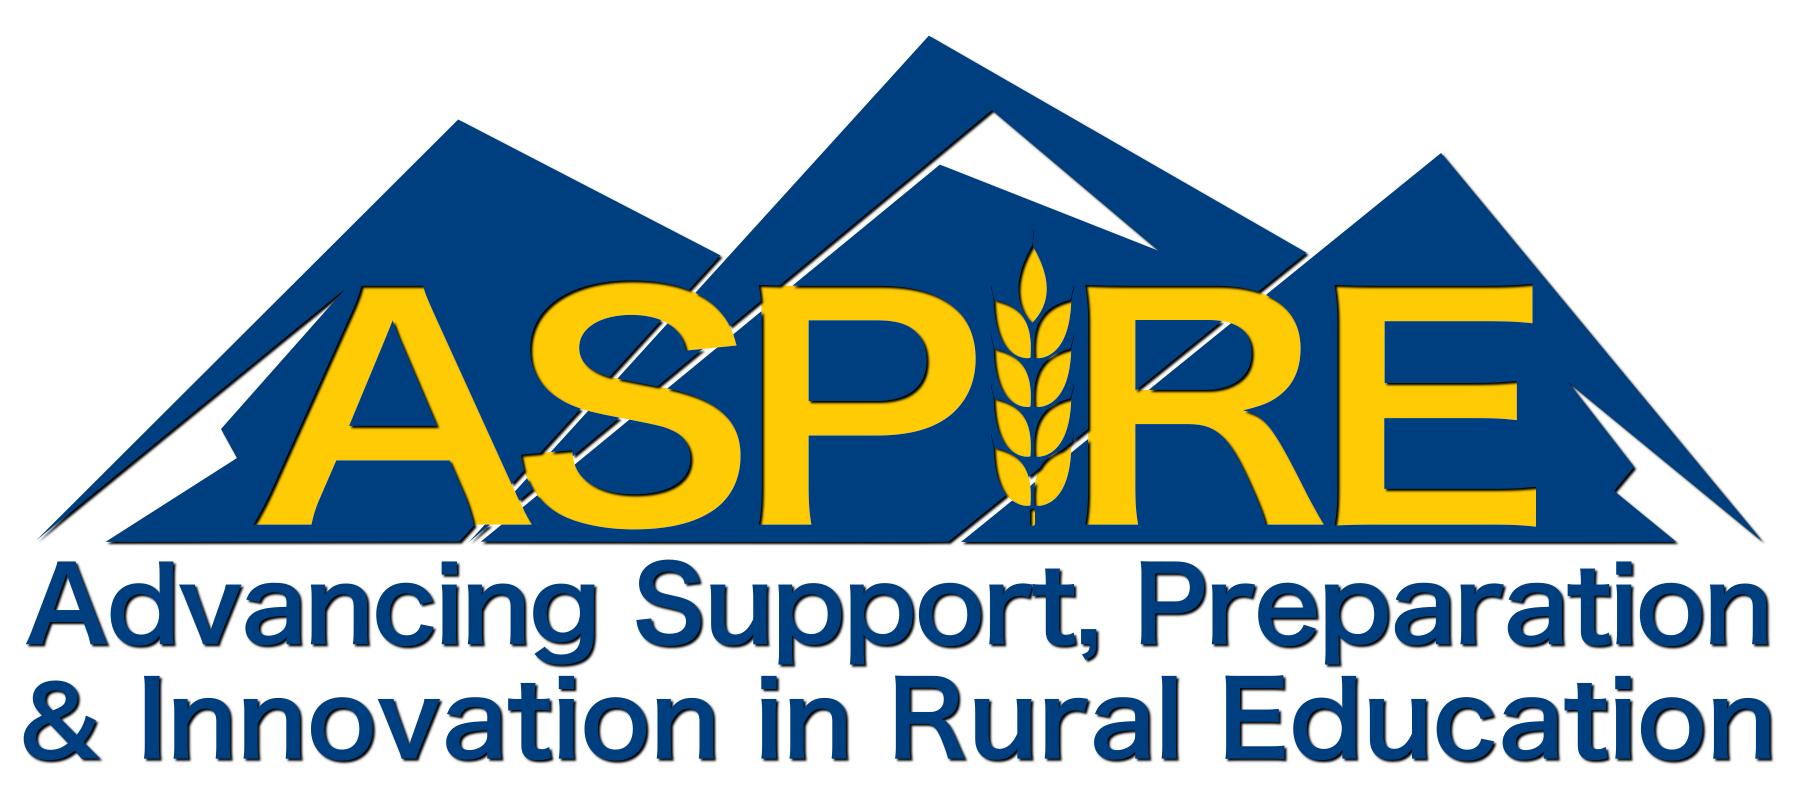 ASPIRE - Advancing Support, Preparation, & Innovation in Rural Education